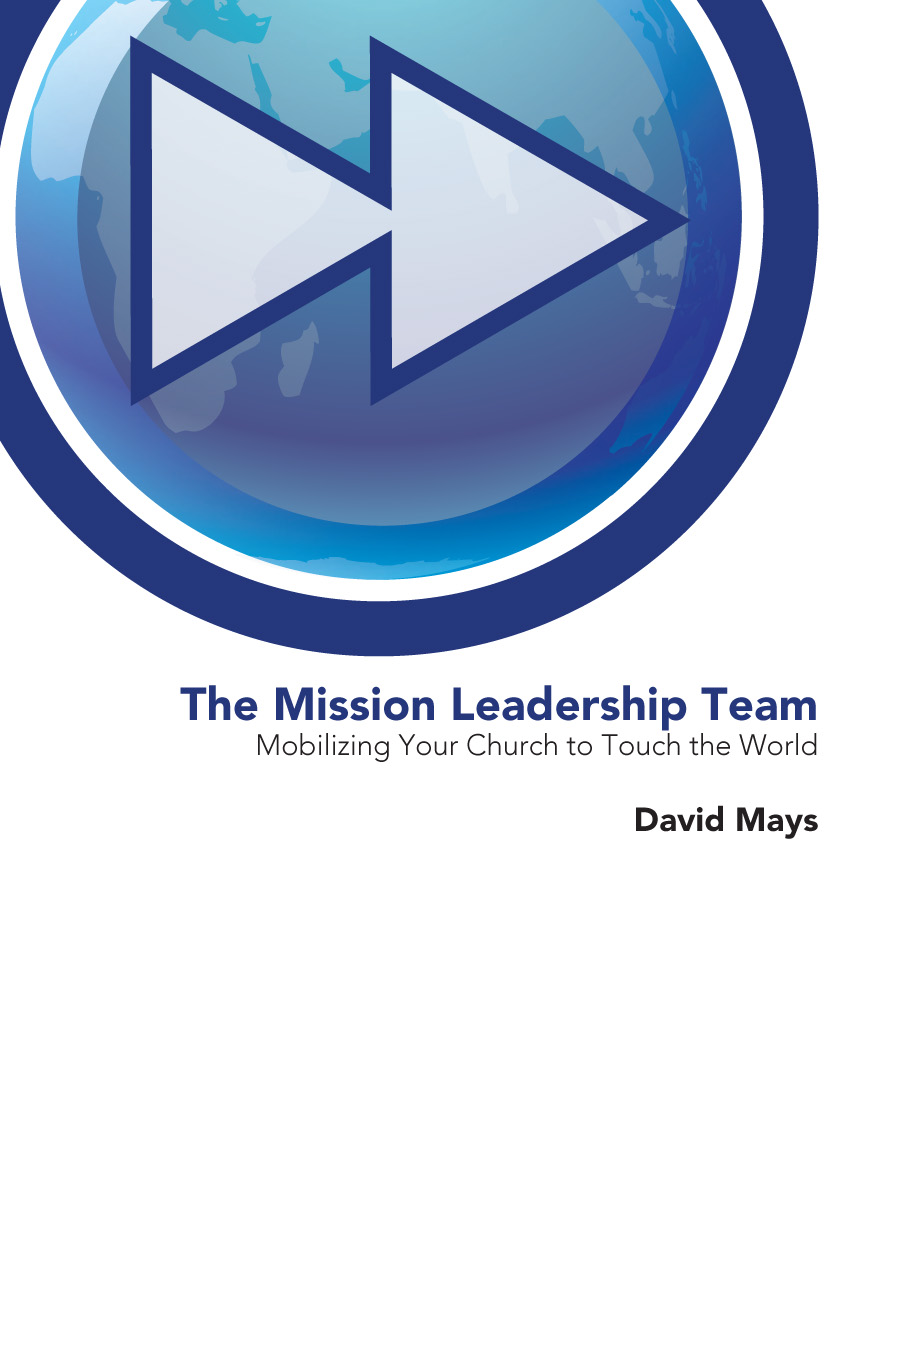 The Mission Leadership Team Mobilizing Your Church to Touch the World